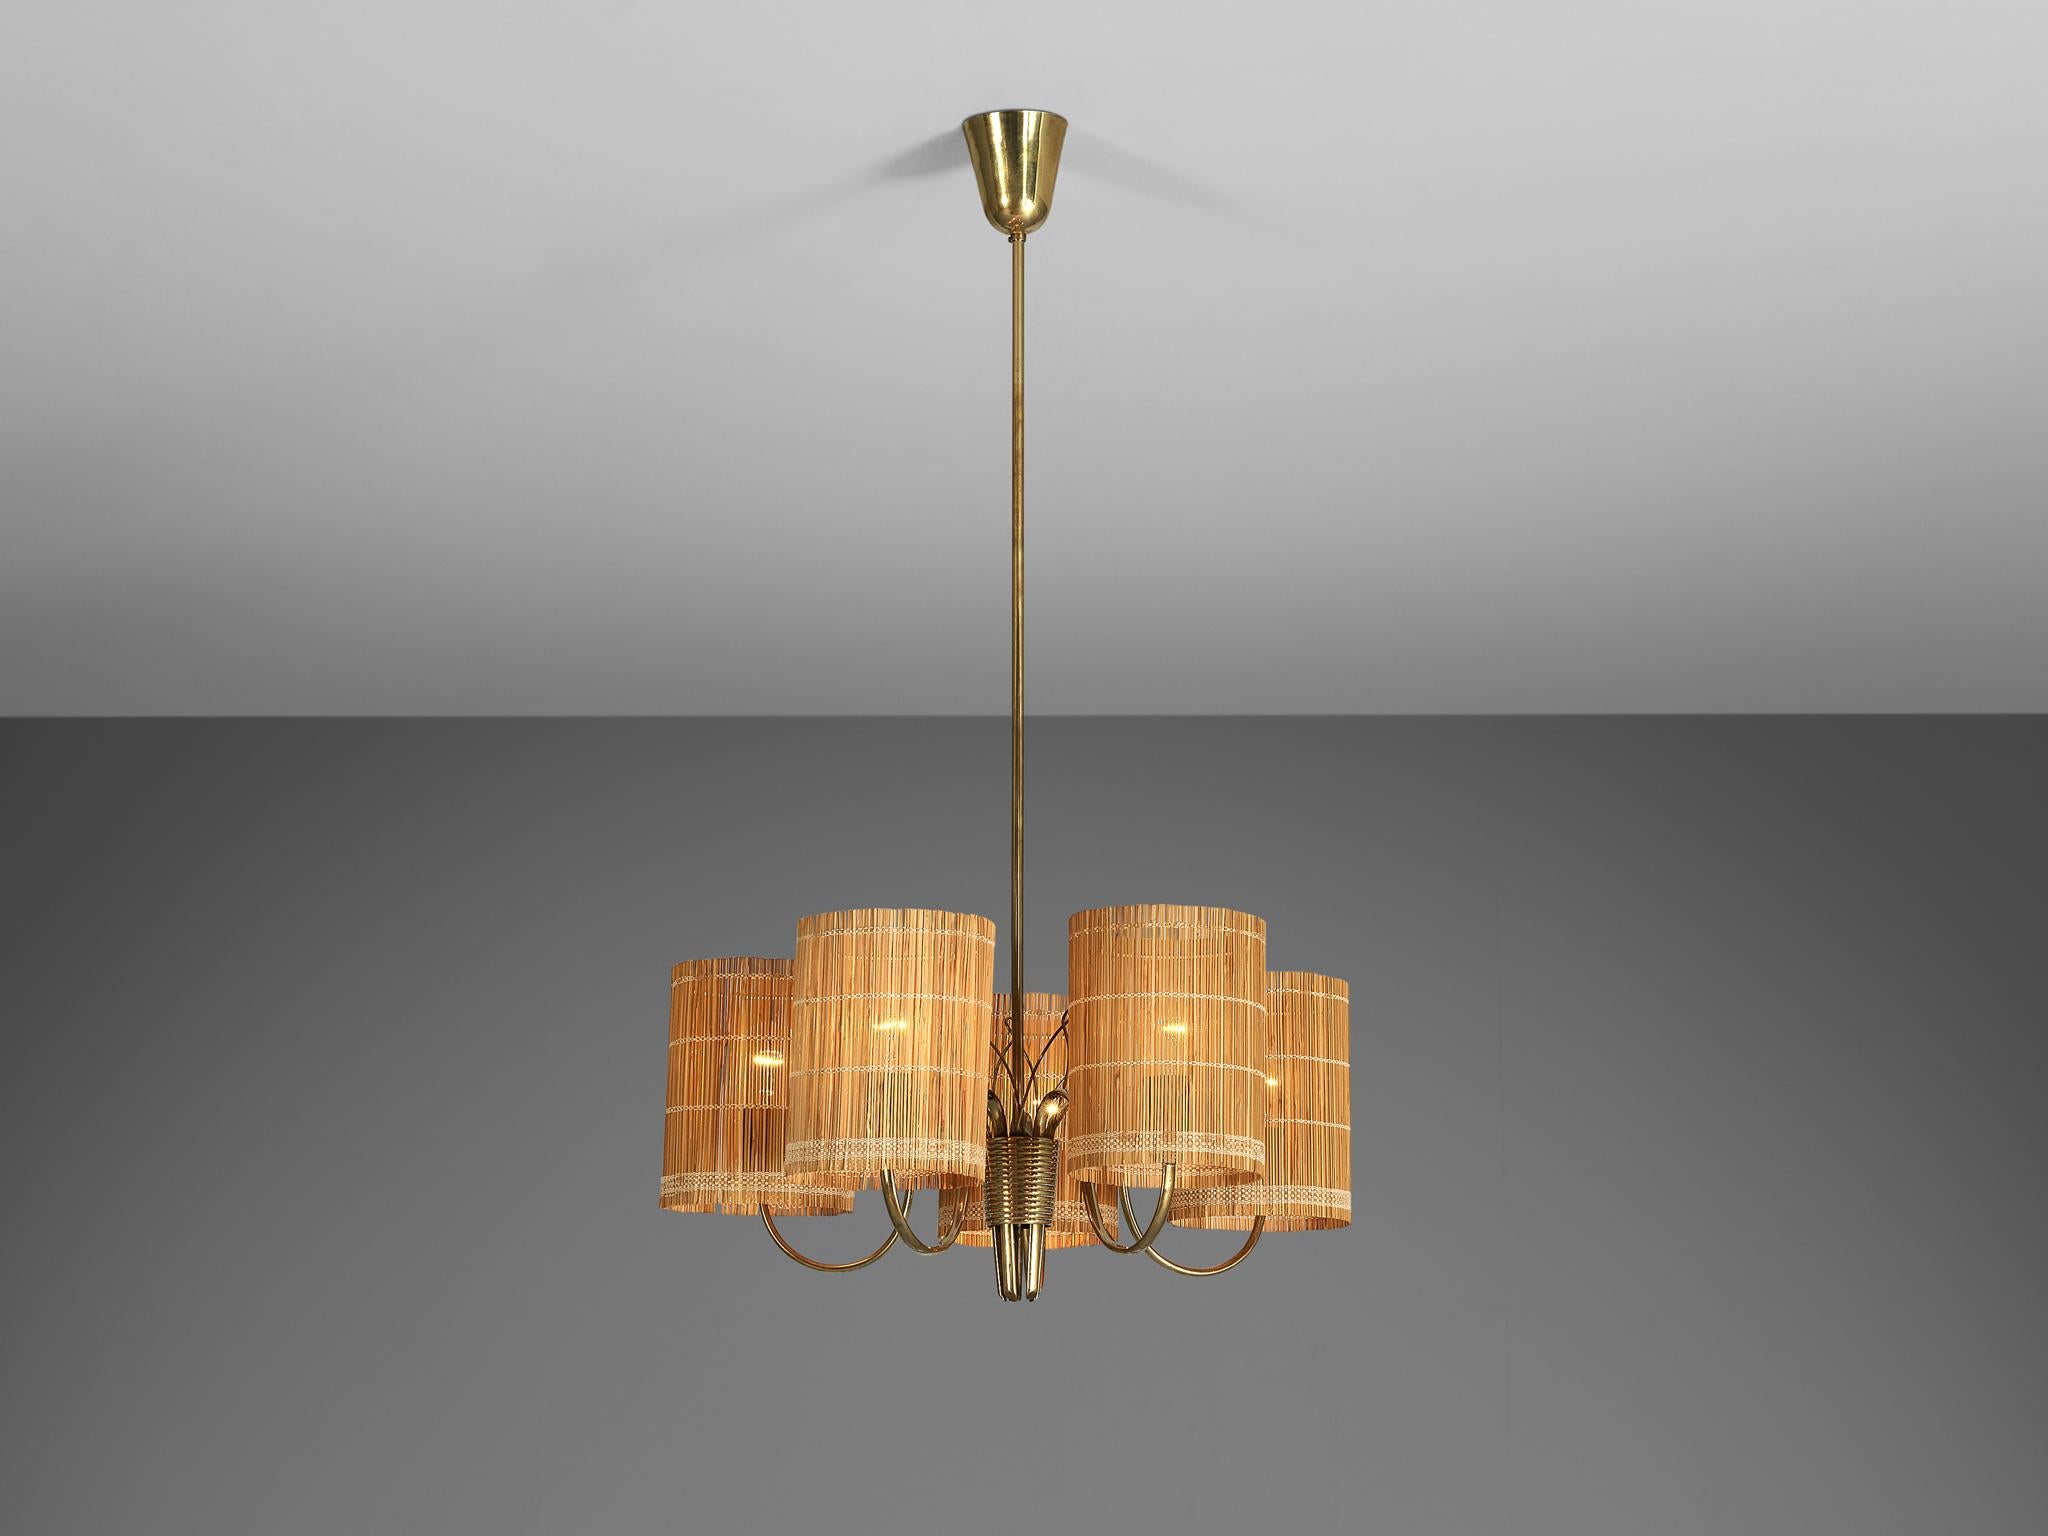 Paavo Tynell for Taito, '9031' chandelier, brass, cane, fabric, Finland, 1950s

A truly magnificent piece that scores highly on every design aspect: execution, use of materials, craftsmanship, and detail. Beautiful chandelier designed by Finnish